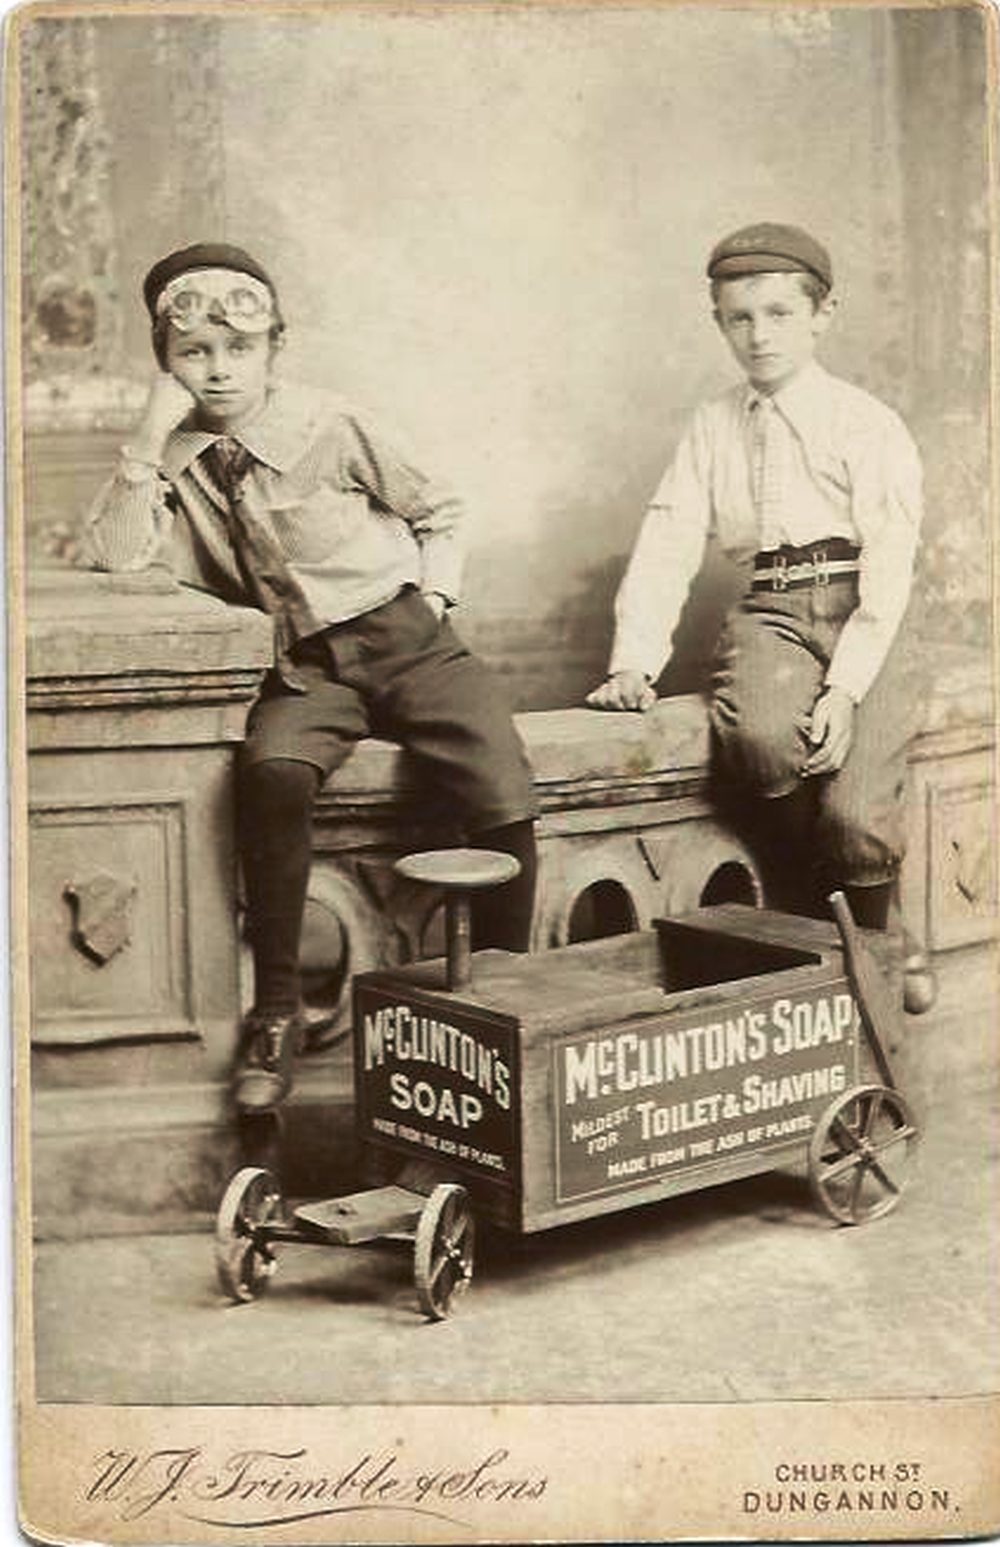 Lawrence and Robert Wilson, sons of the late Revd William Wilson, and nephews of David Brown, who featured in advertising cards for McClinton's soaps, arising from the display at the International Exhibition in 1907, courtesy of Donaghmore Historical Society.